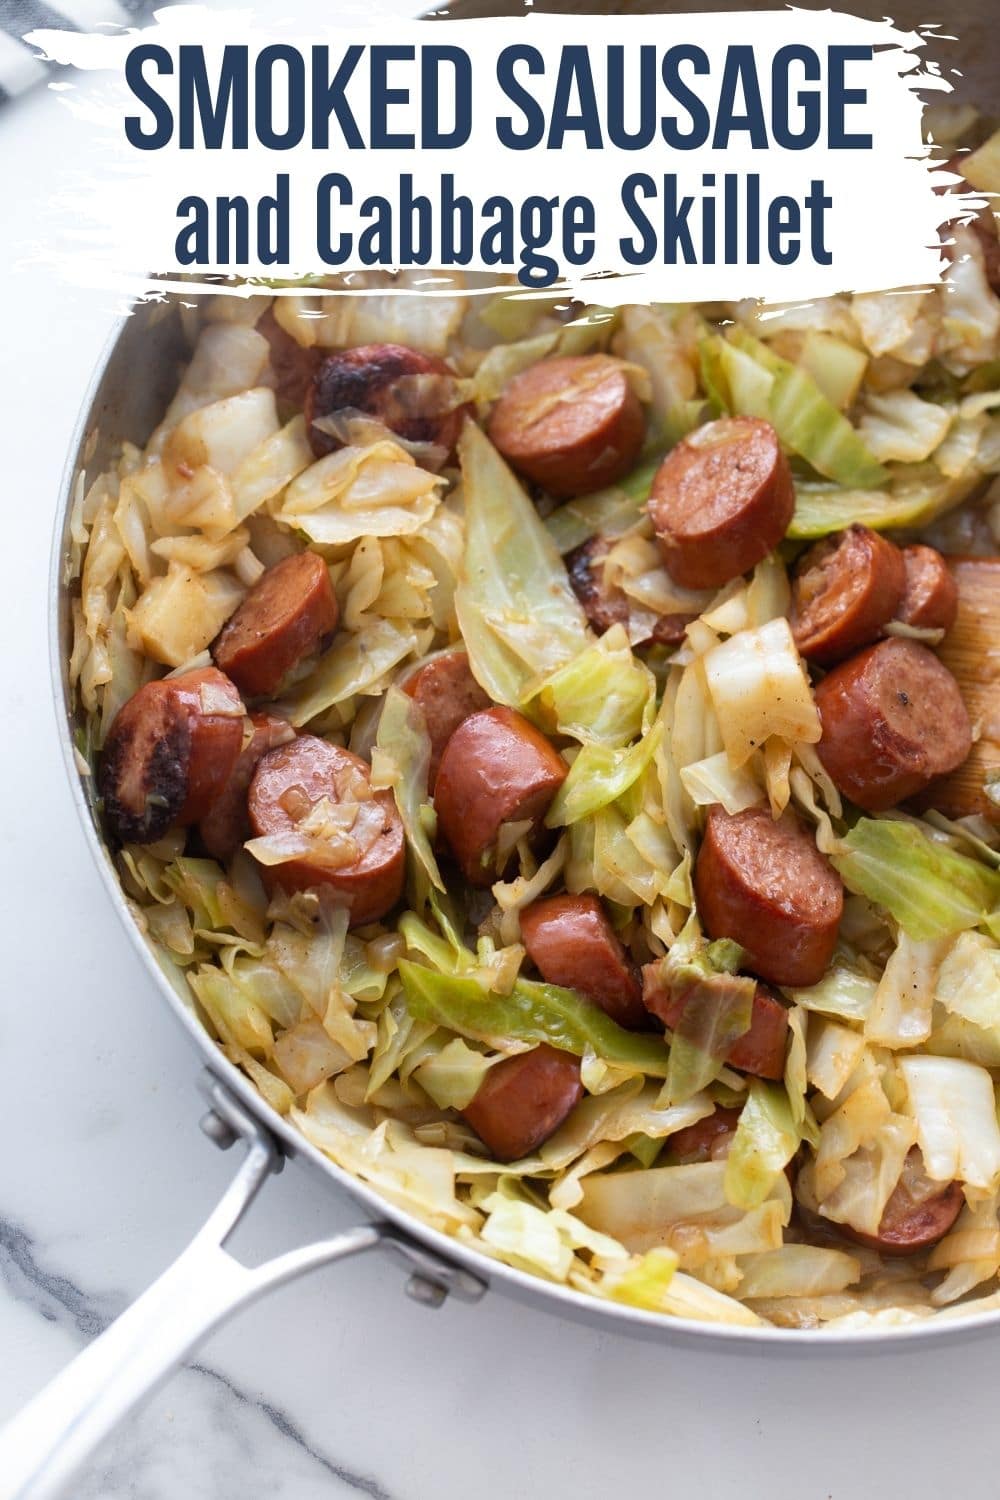 Smoked Sausage & Cabbage in a Skillet